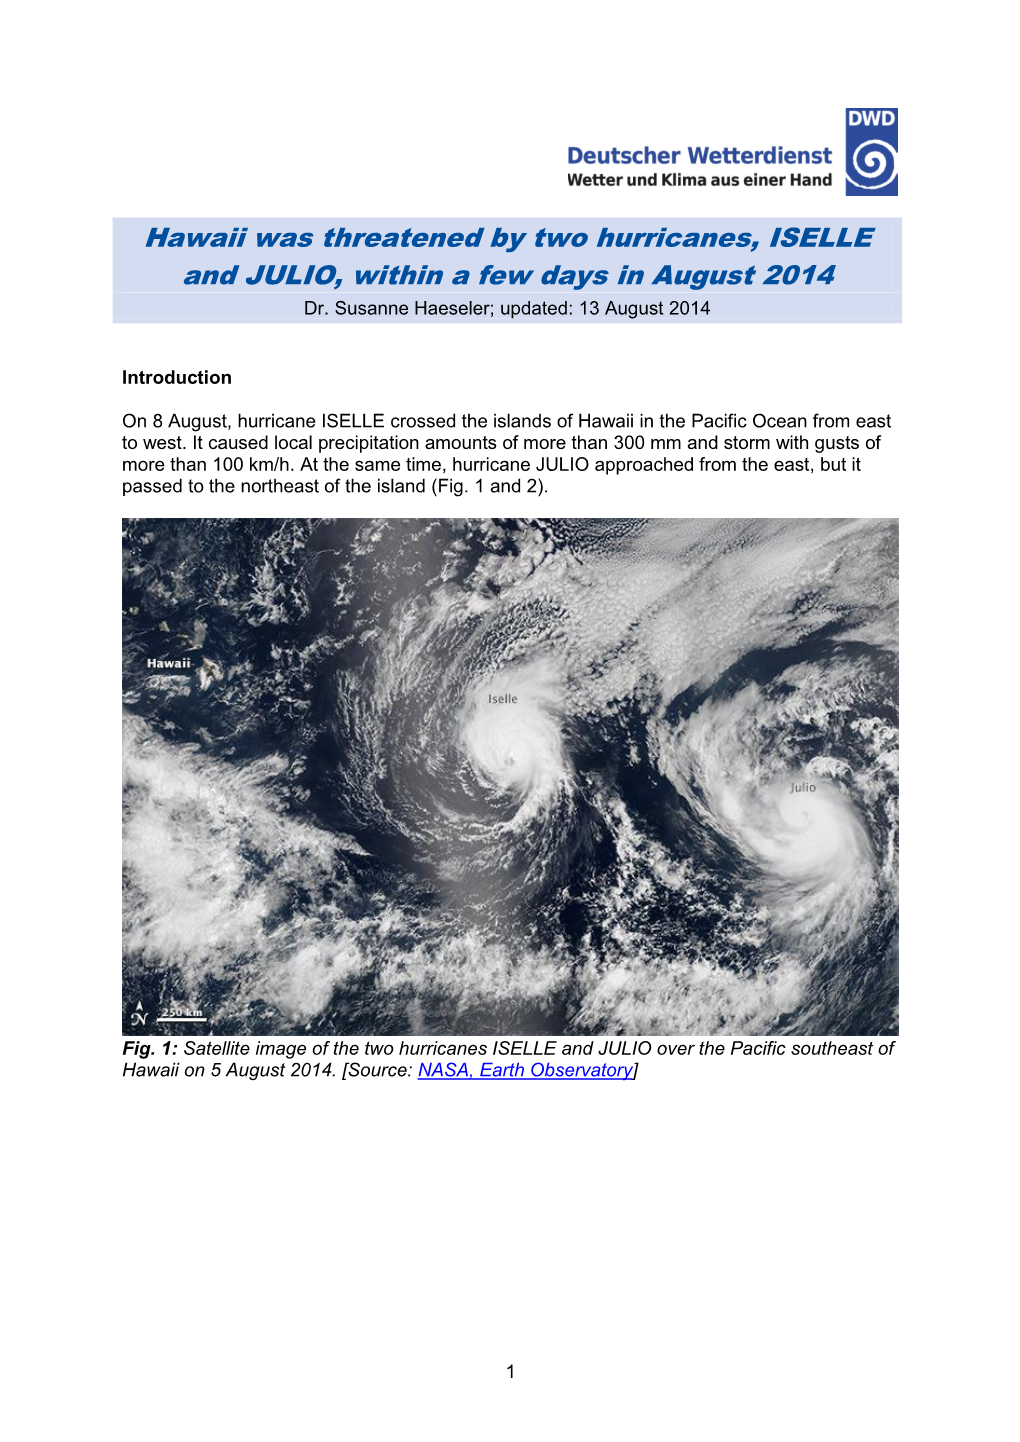 Hawaii Was Threatened by Two Hurricanes, ISELLE and JULIO, Within a Few Days in August 2014 Dr